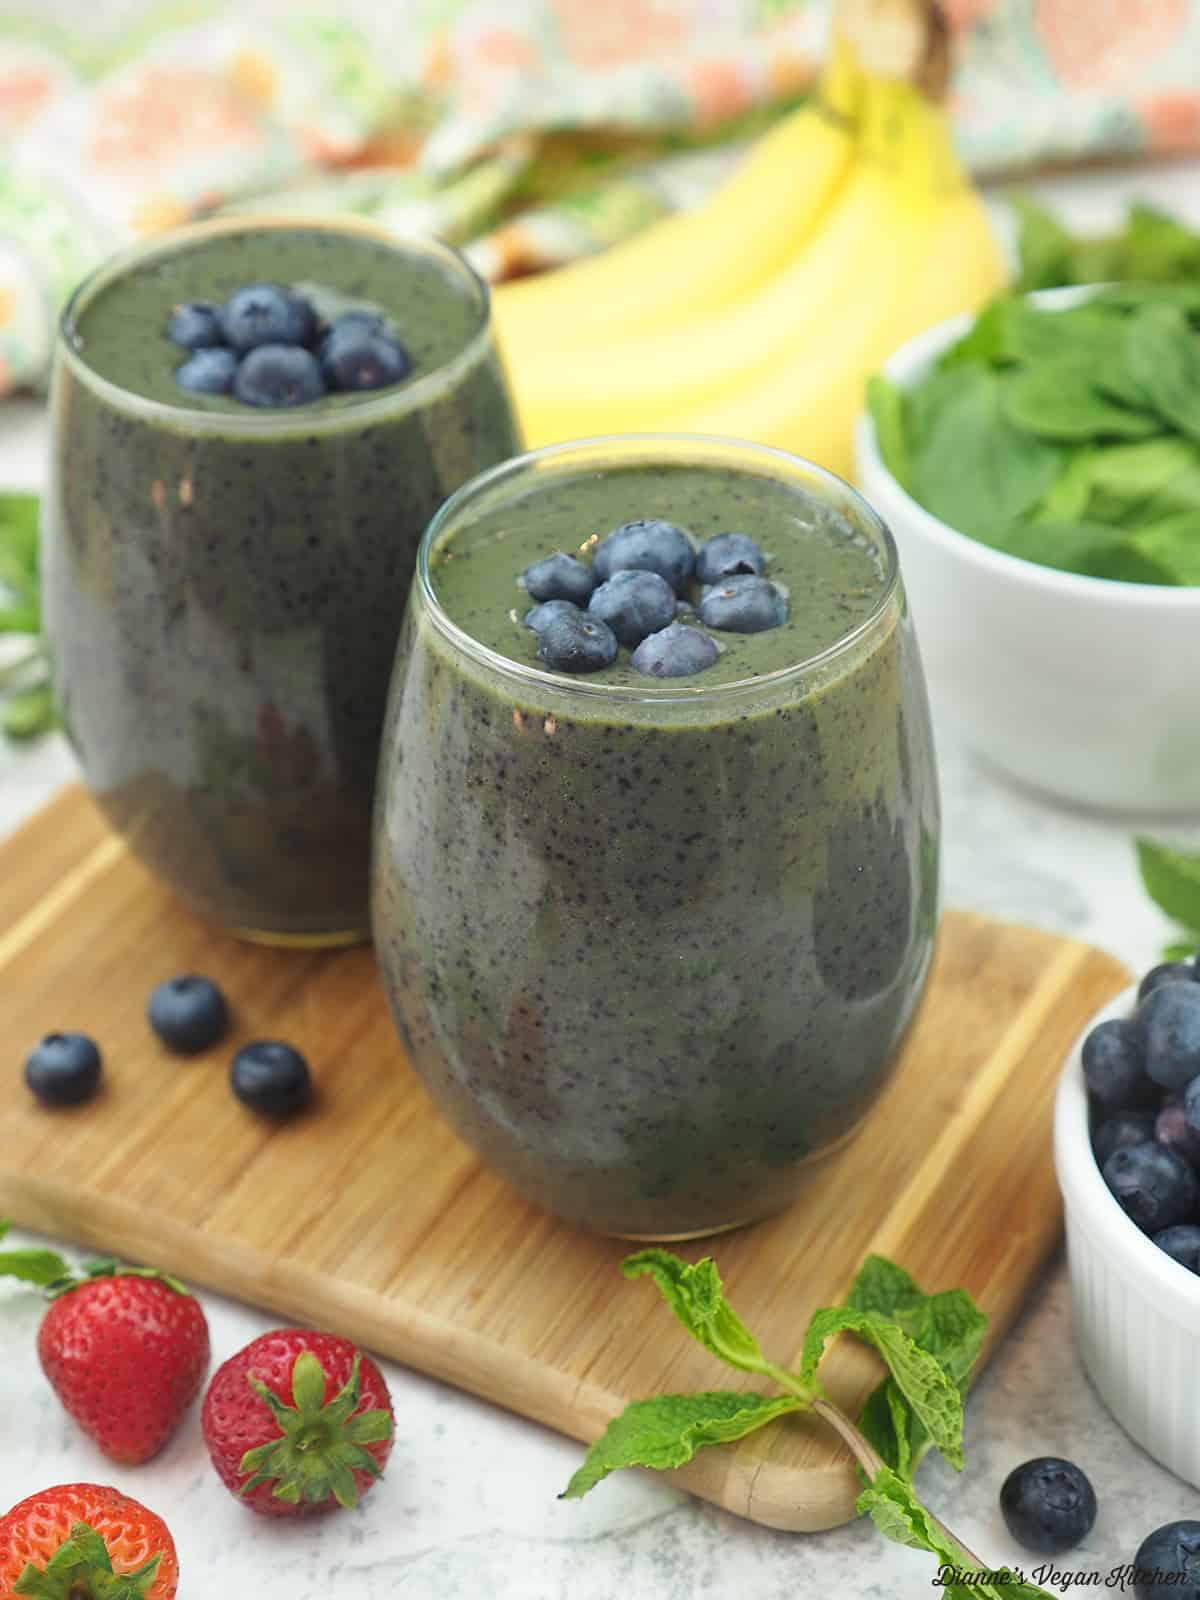 Blueberry Smoothie with blueberries, bananas, strawberries and a bowl of spinach